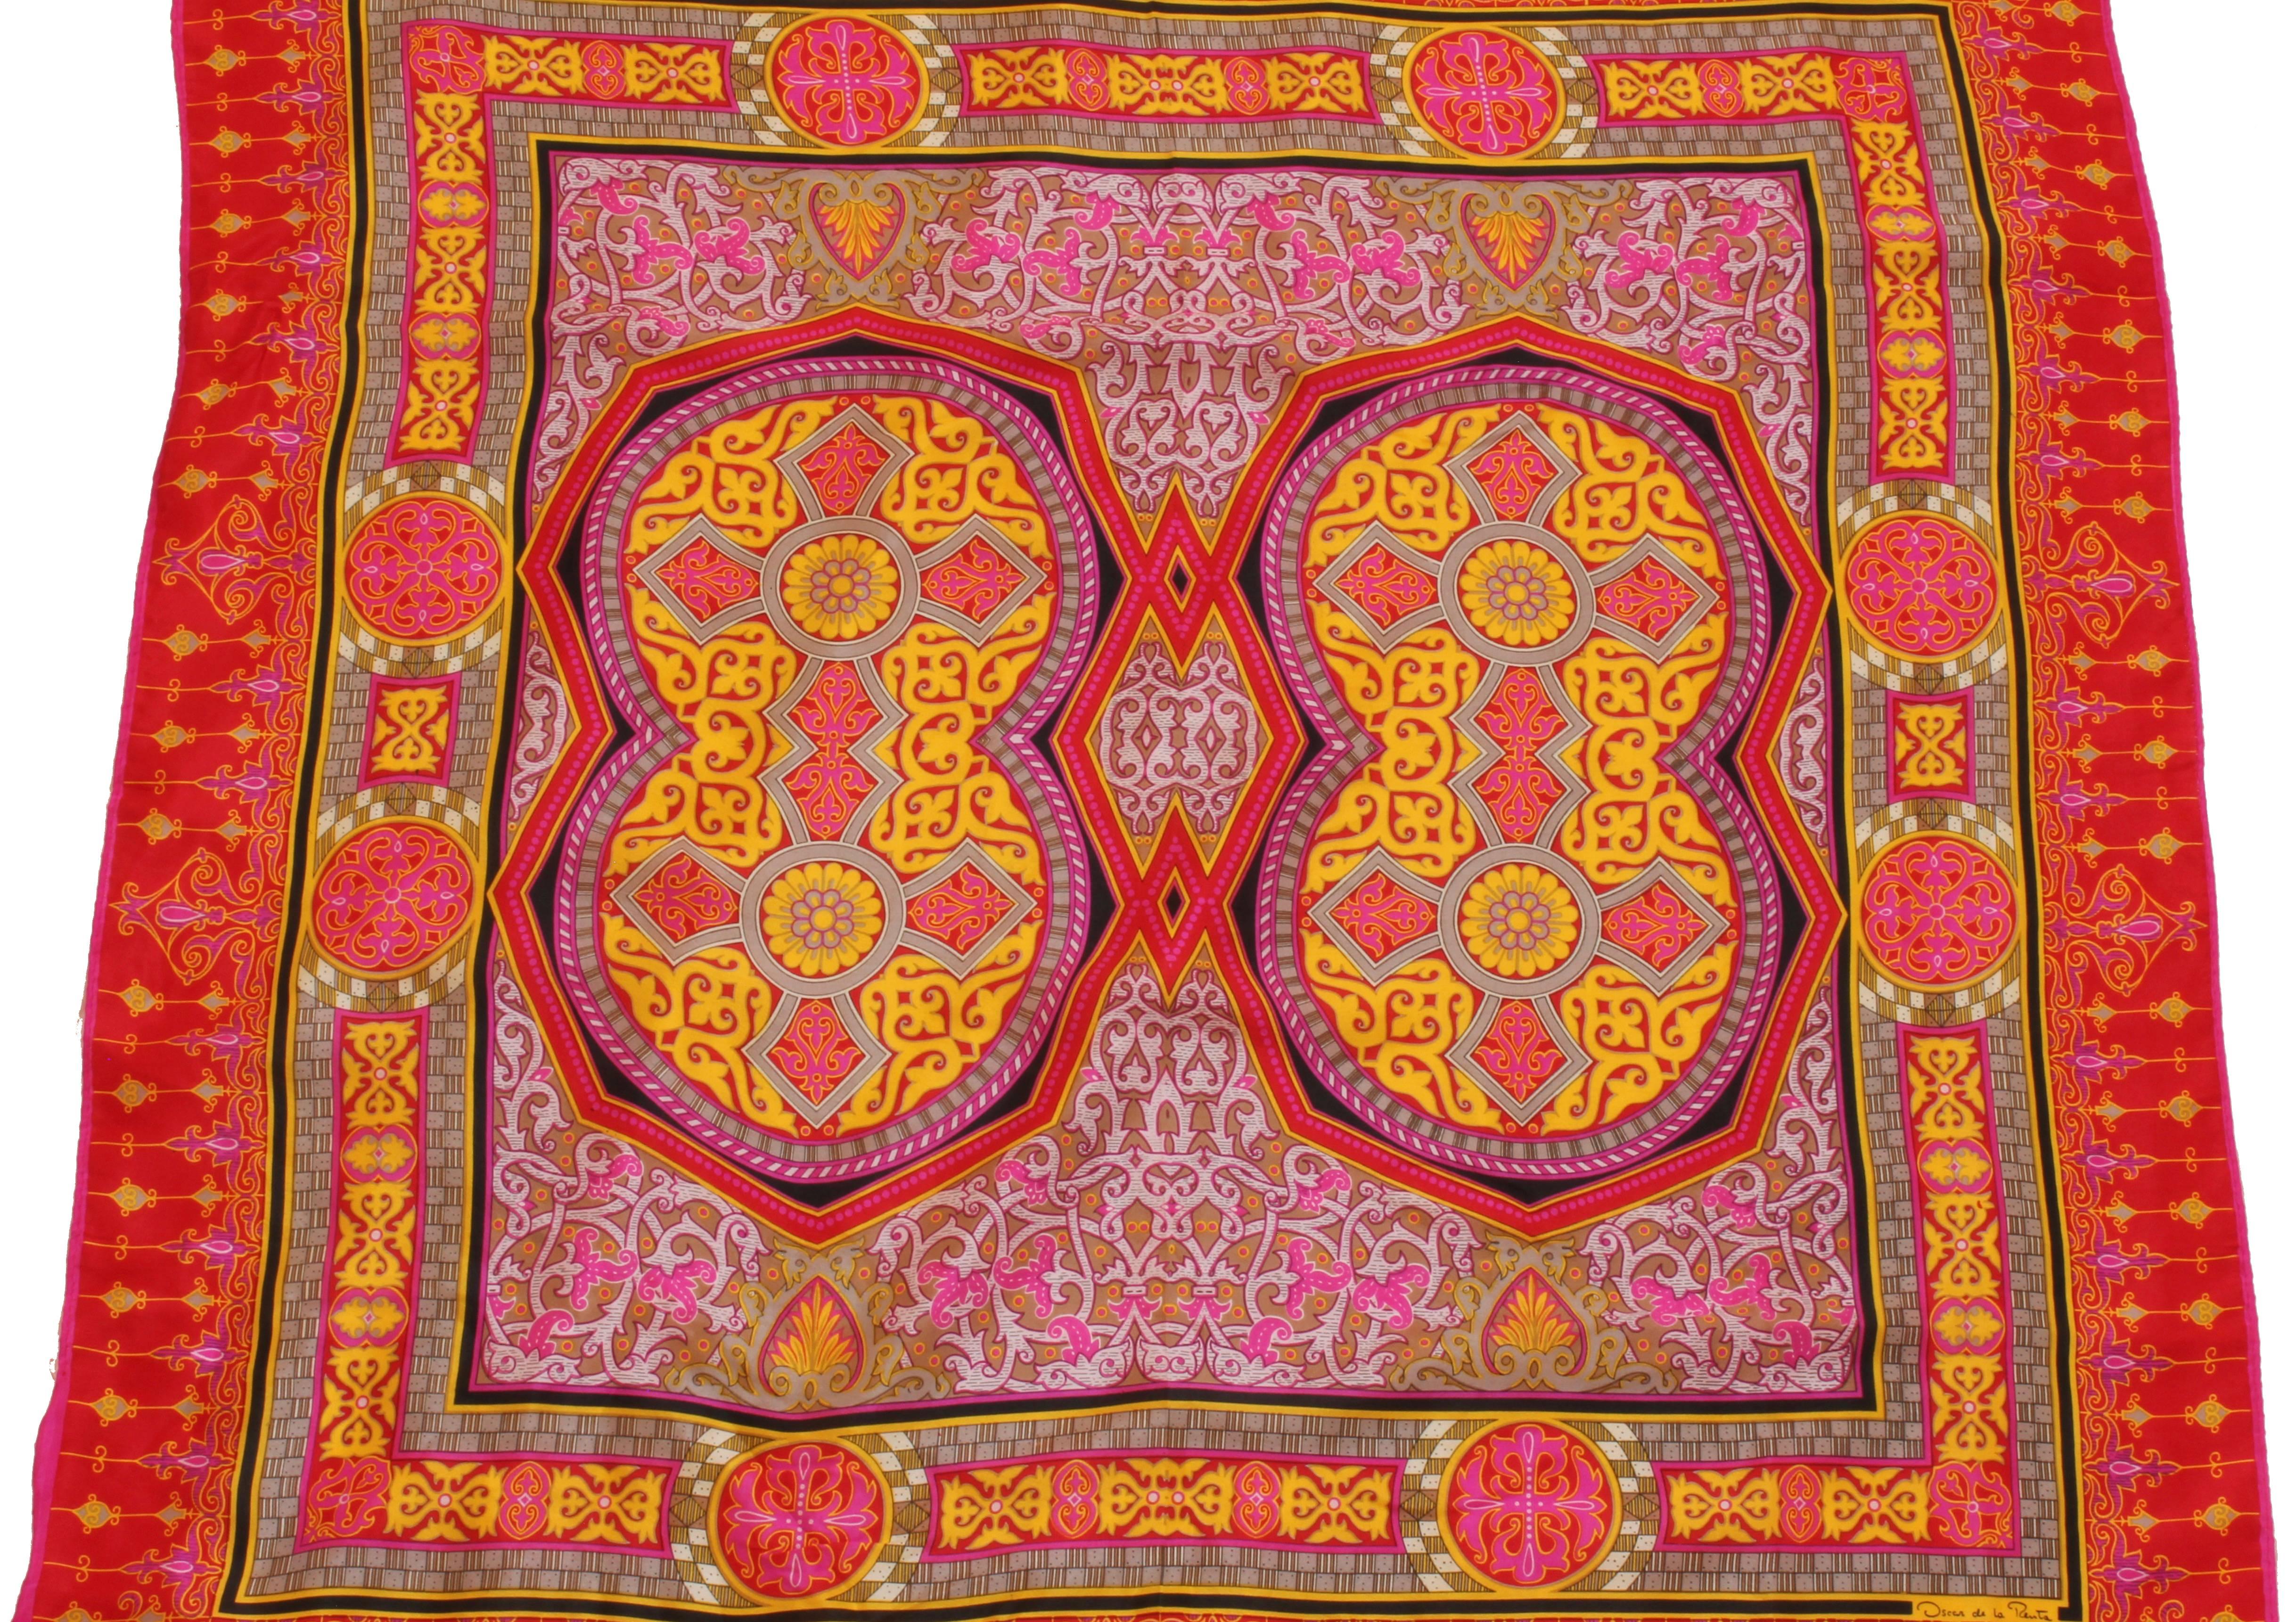 This pretty vintage scarf was made by ACCESSORY STREET for Oscar de la Renta, likely in the 1960s.  Made from 100% silk, it features a baroque style design in shades of pink, orange and yellow.  It measures 31in square, making it easy to wear as a